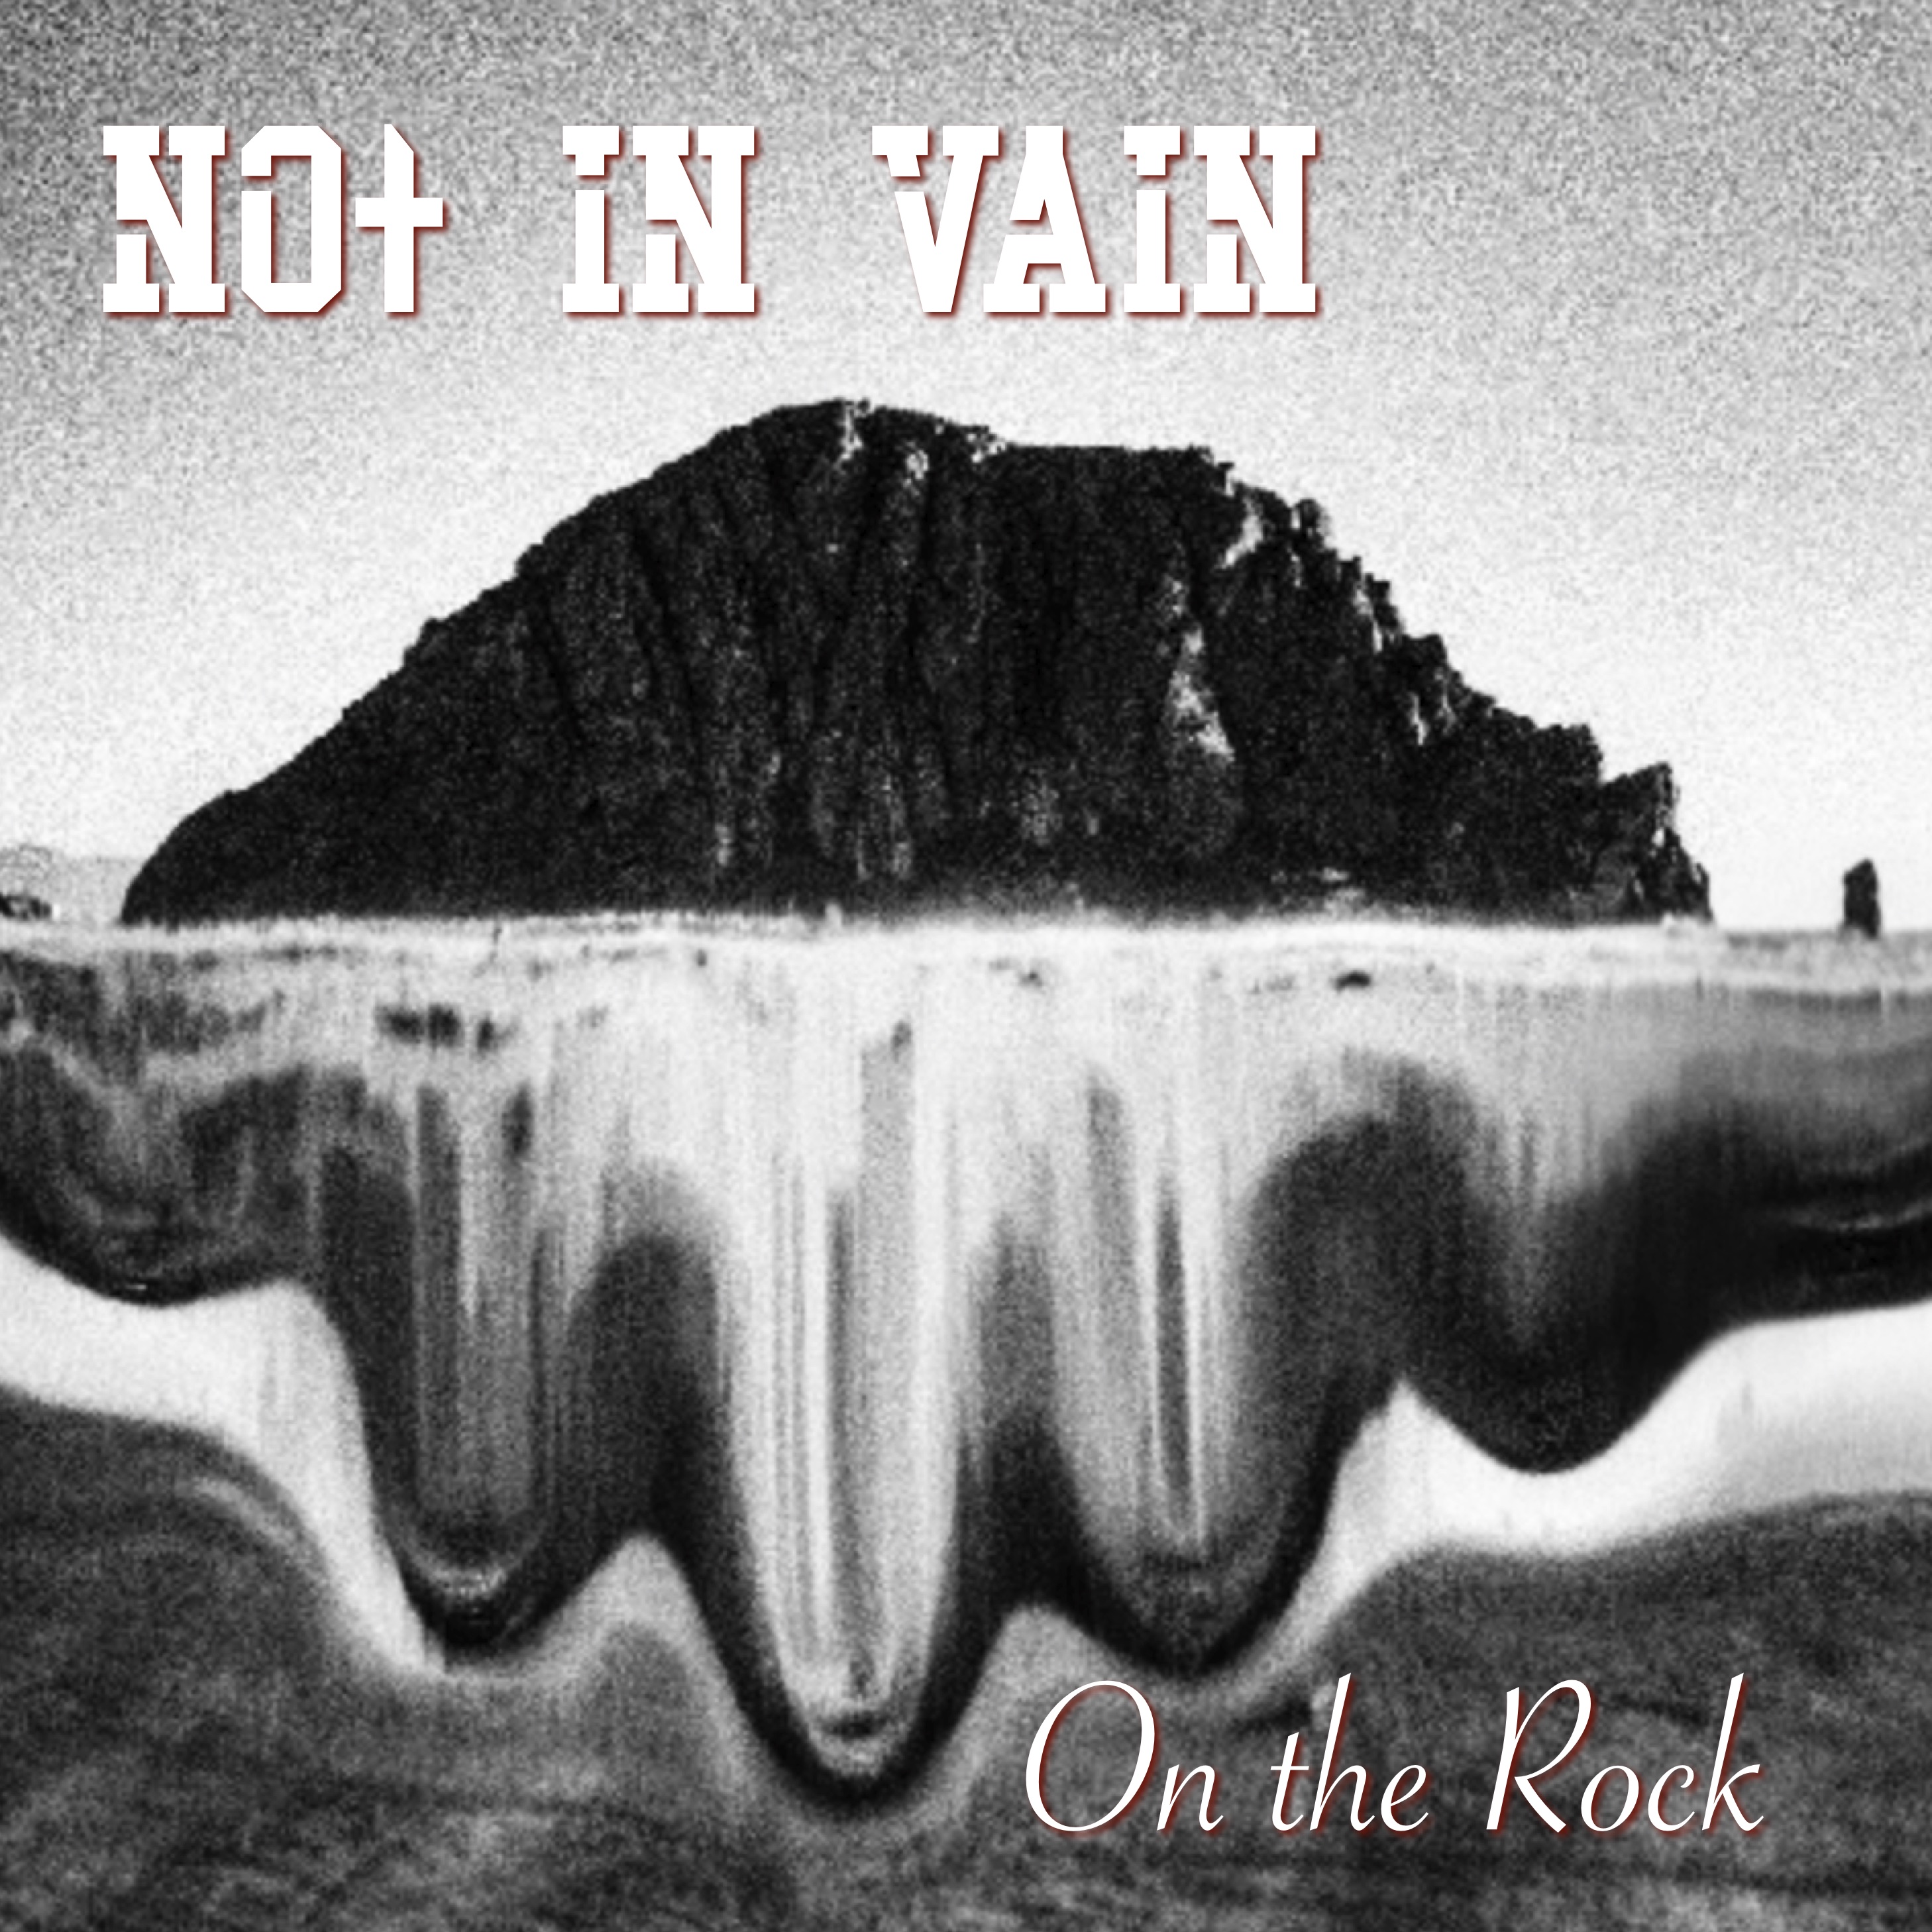 Art for On the Rock by Not In Vain